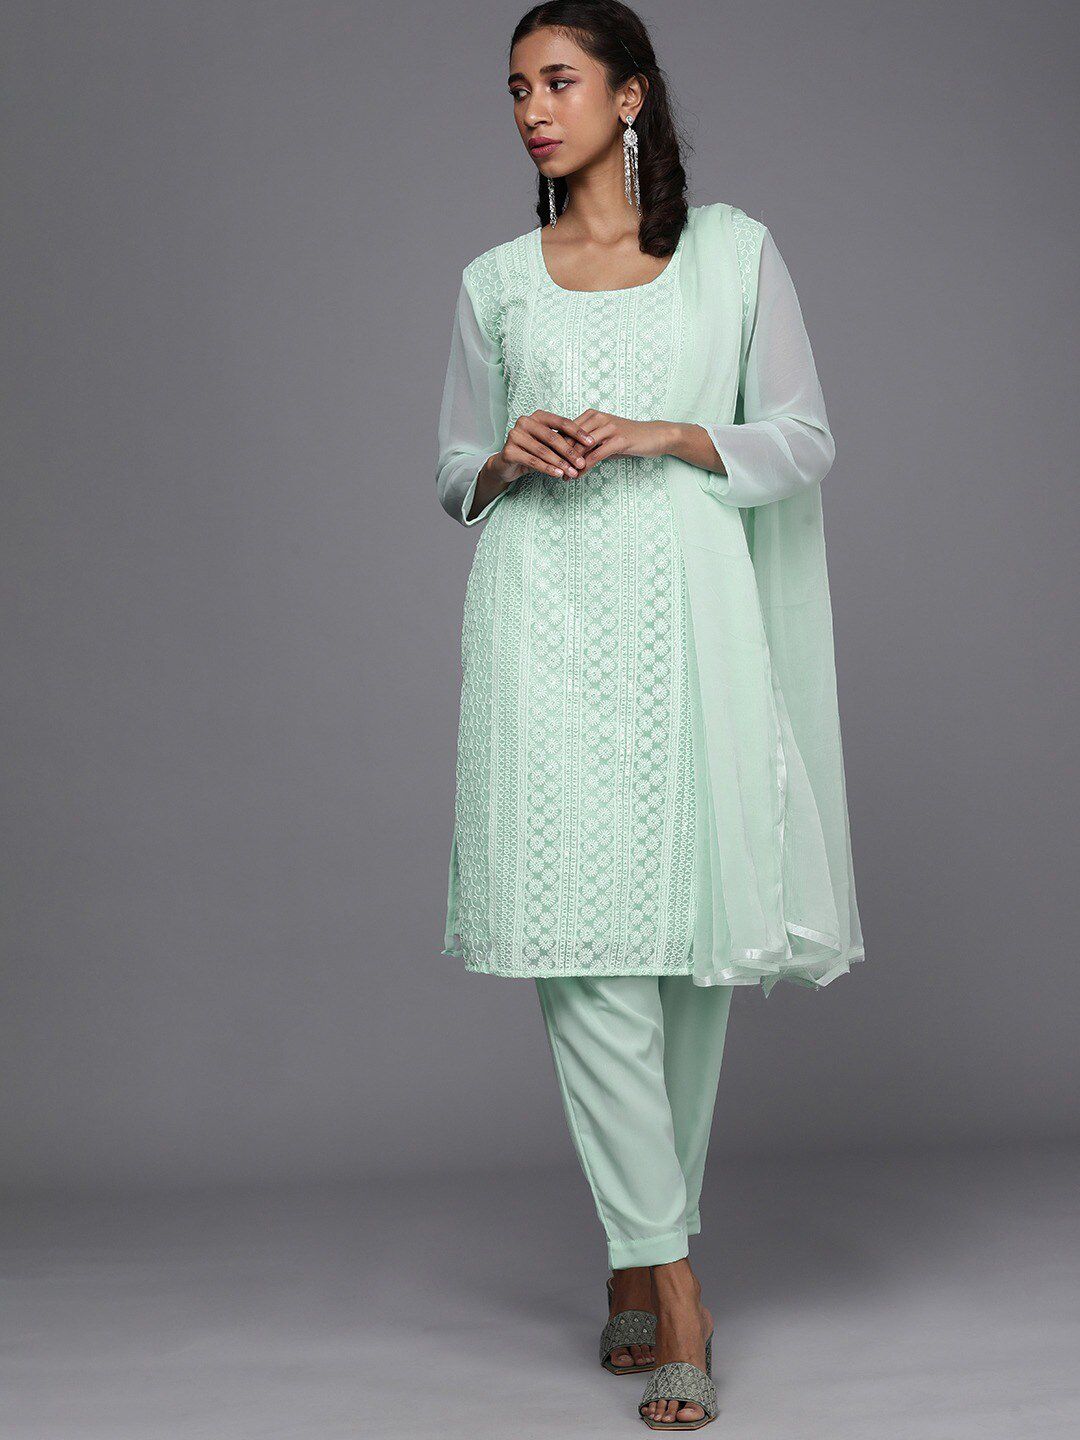 KALINI Sea Green Embroidered Unstitched Dress Material Price in India